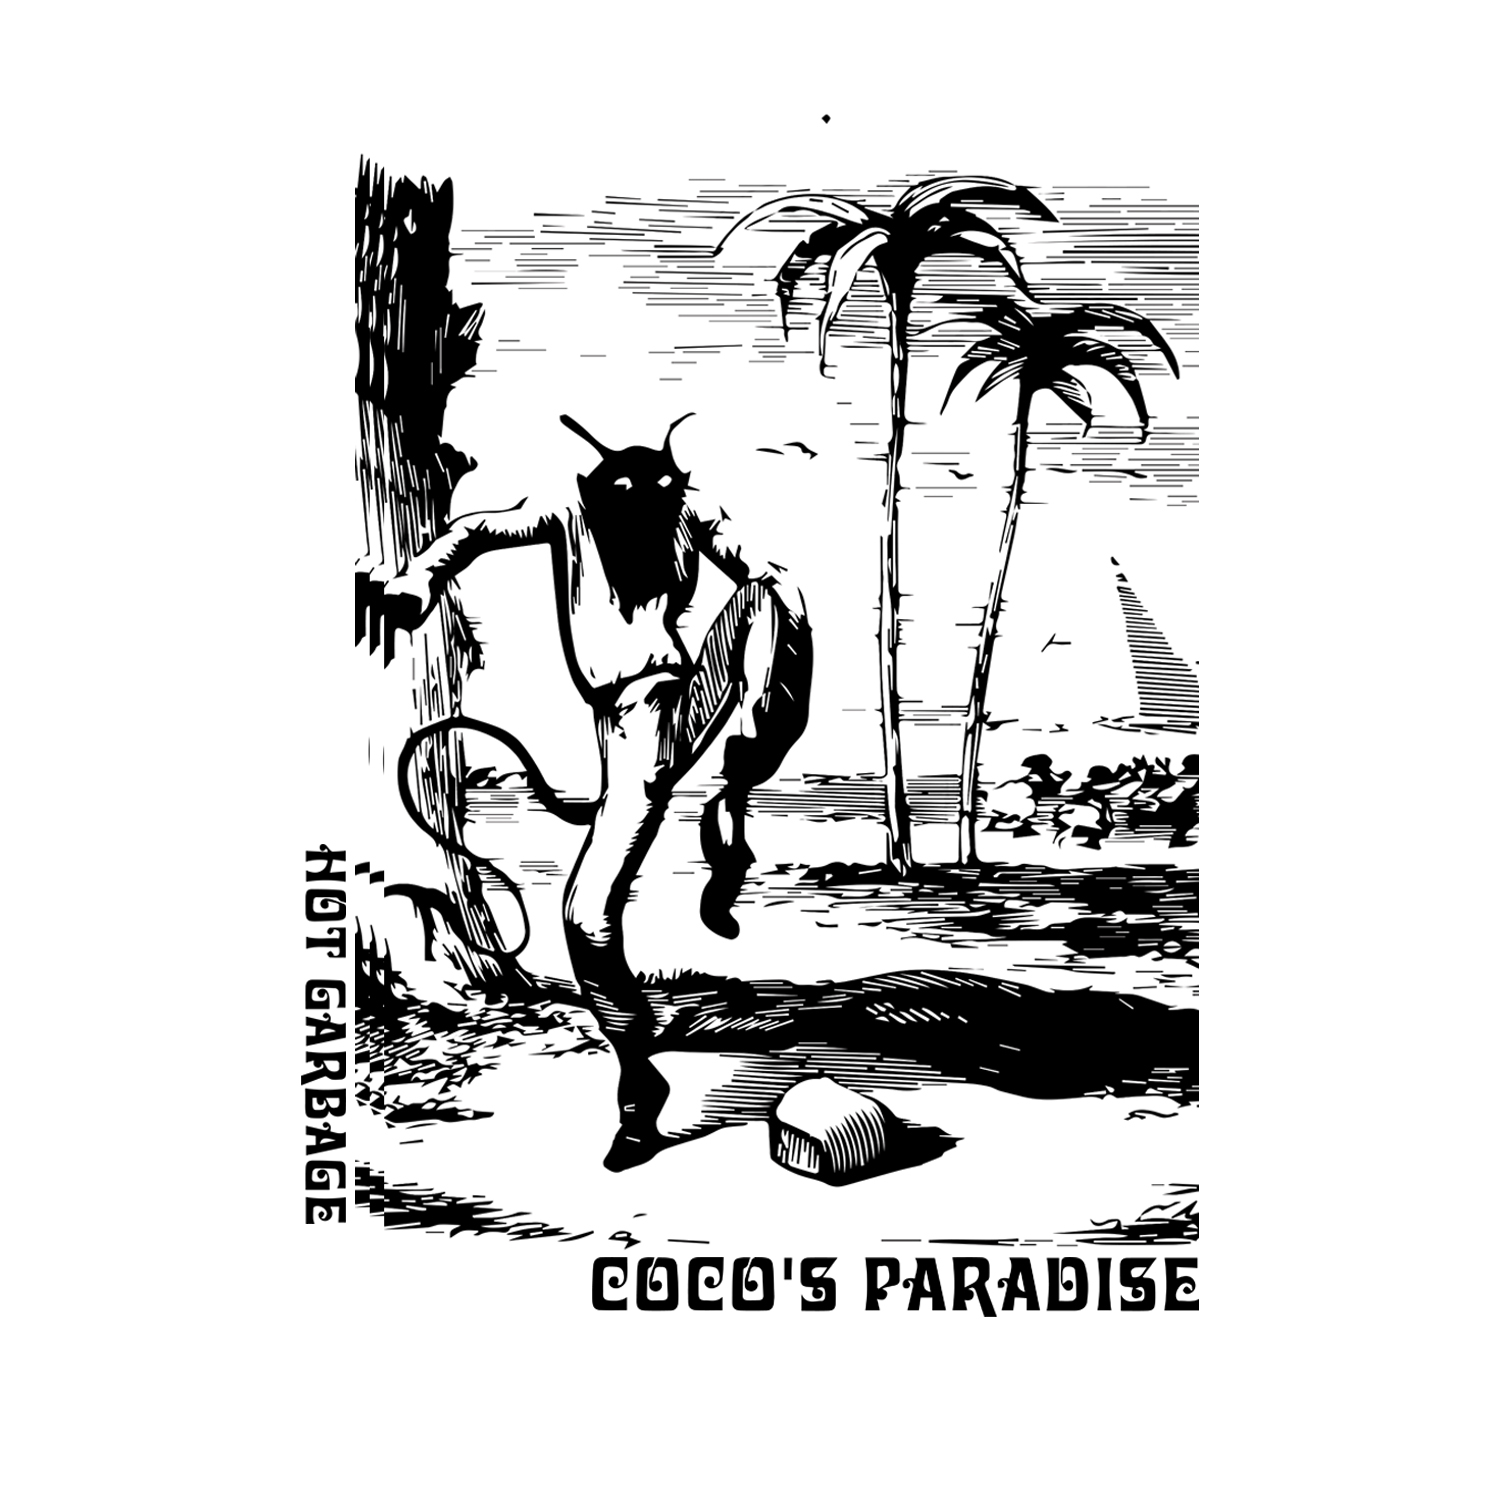 Hot Garbage Drop New Single '100' Ahead of 'Coco's Paradise' EP 